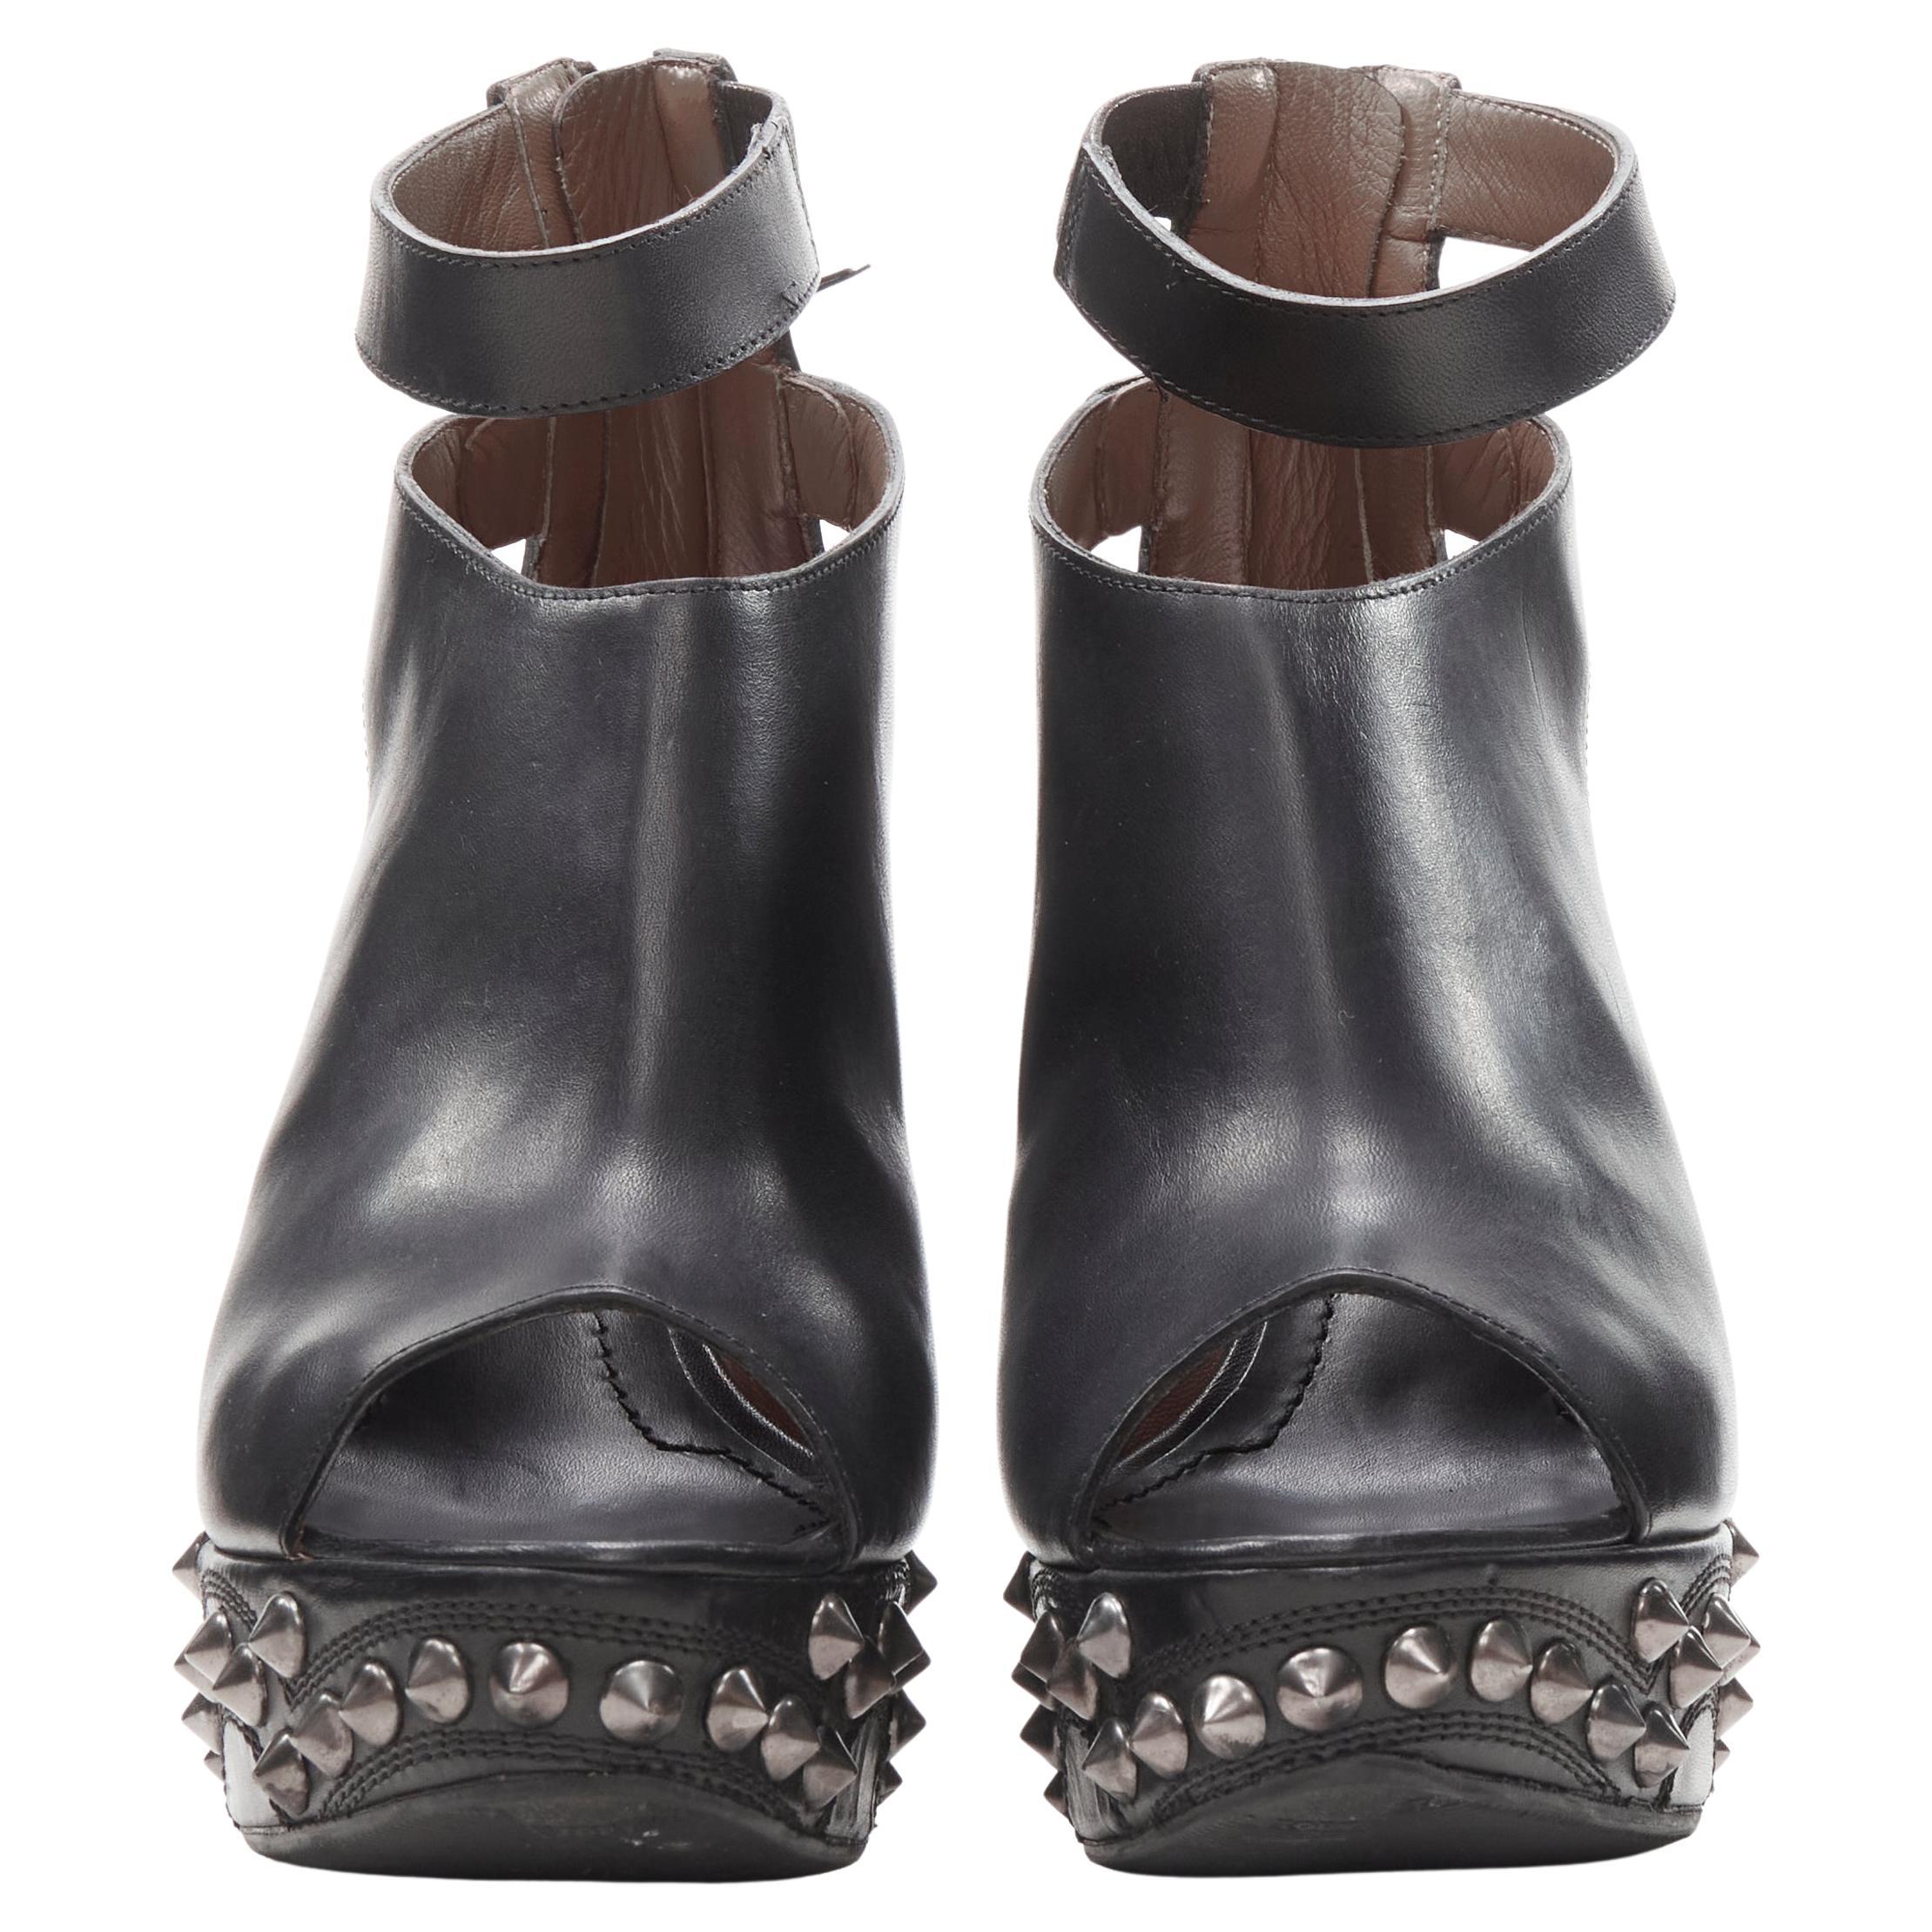 GIVENCHY black silver spike baroque studded platform wedge gladiator EU36.5
Brand: Givenchy
Designer: Riccardo Tisci
Material: Leather
Color: Black
Pattern: Solid
Closure: Zip
Extra Detail: Ankle strap with zip back closure.

CONDITION:
Condition: